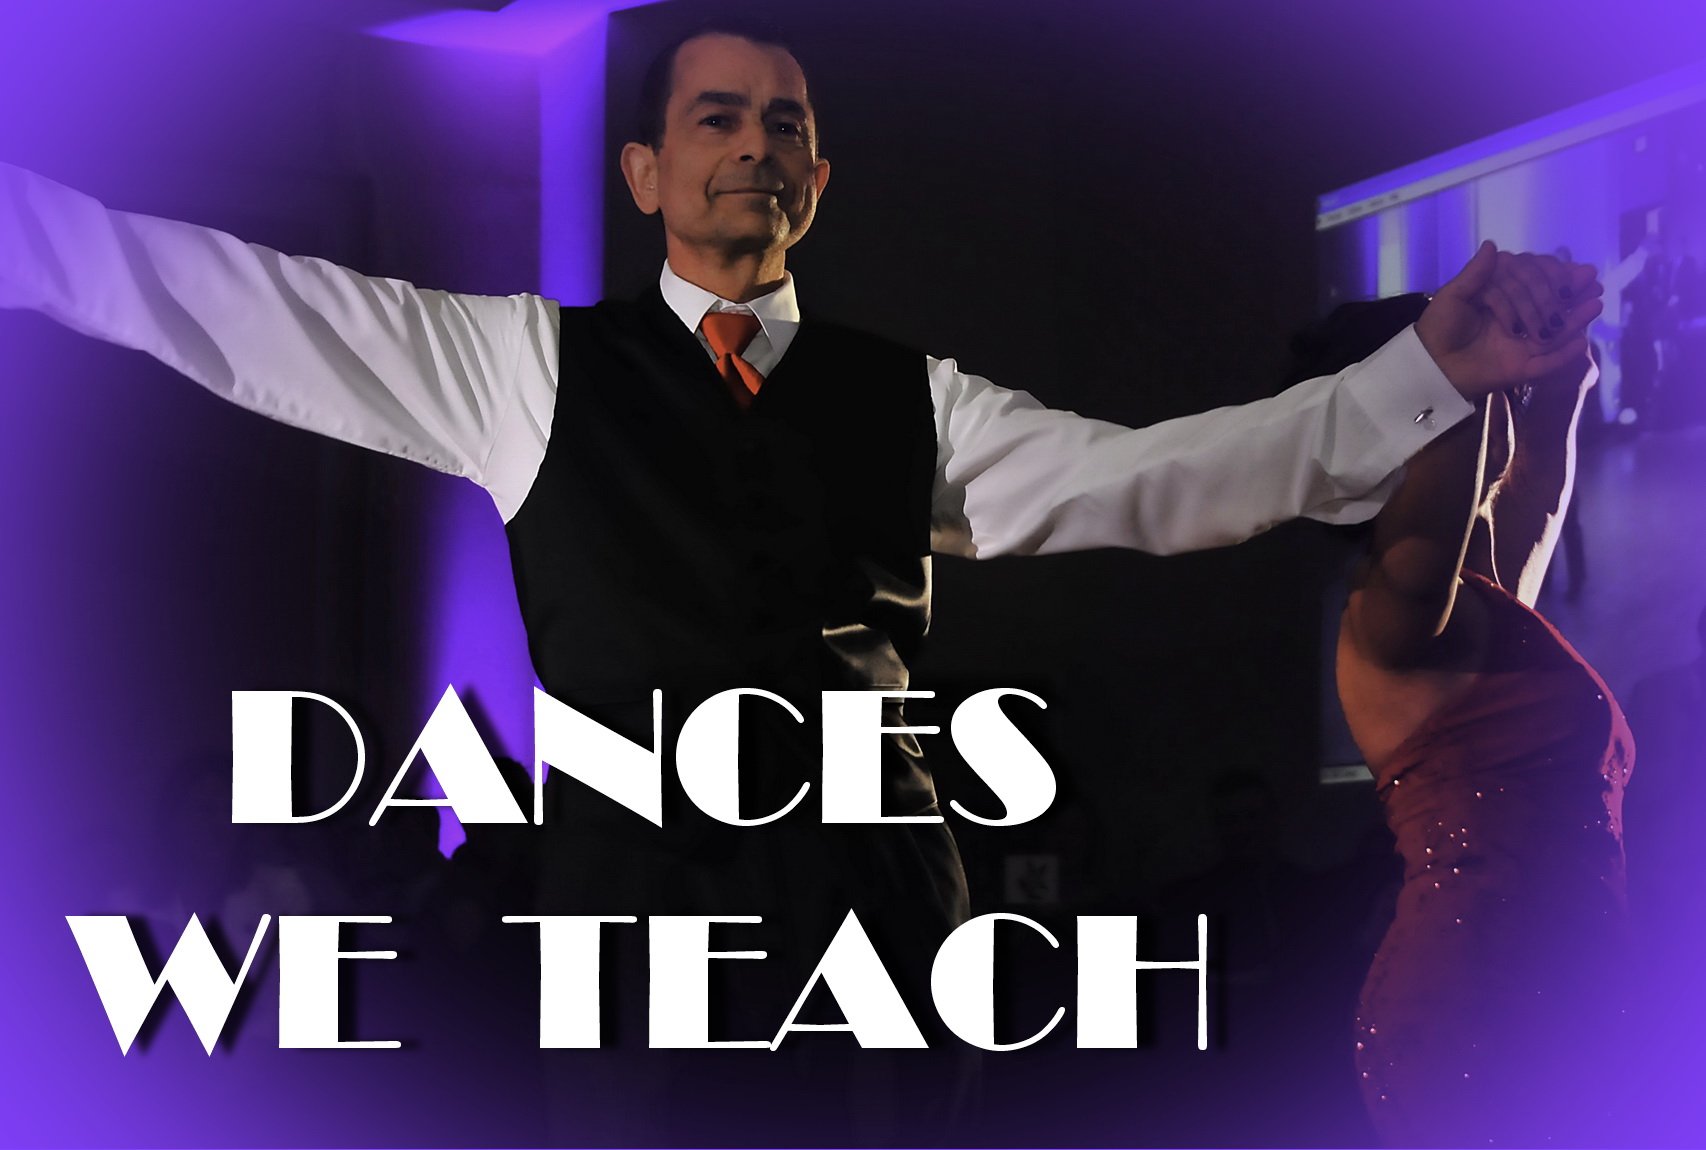 salsa dancing barrie salsa lessons barrie bachata lessons barrie kizomba lessons barrie west coast swing lessons barrie